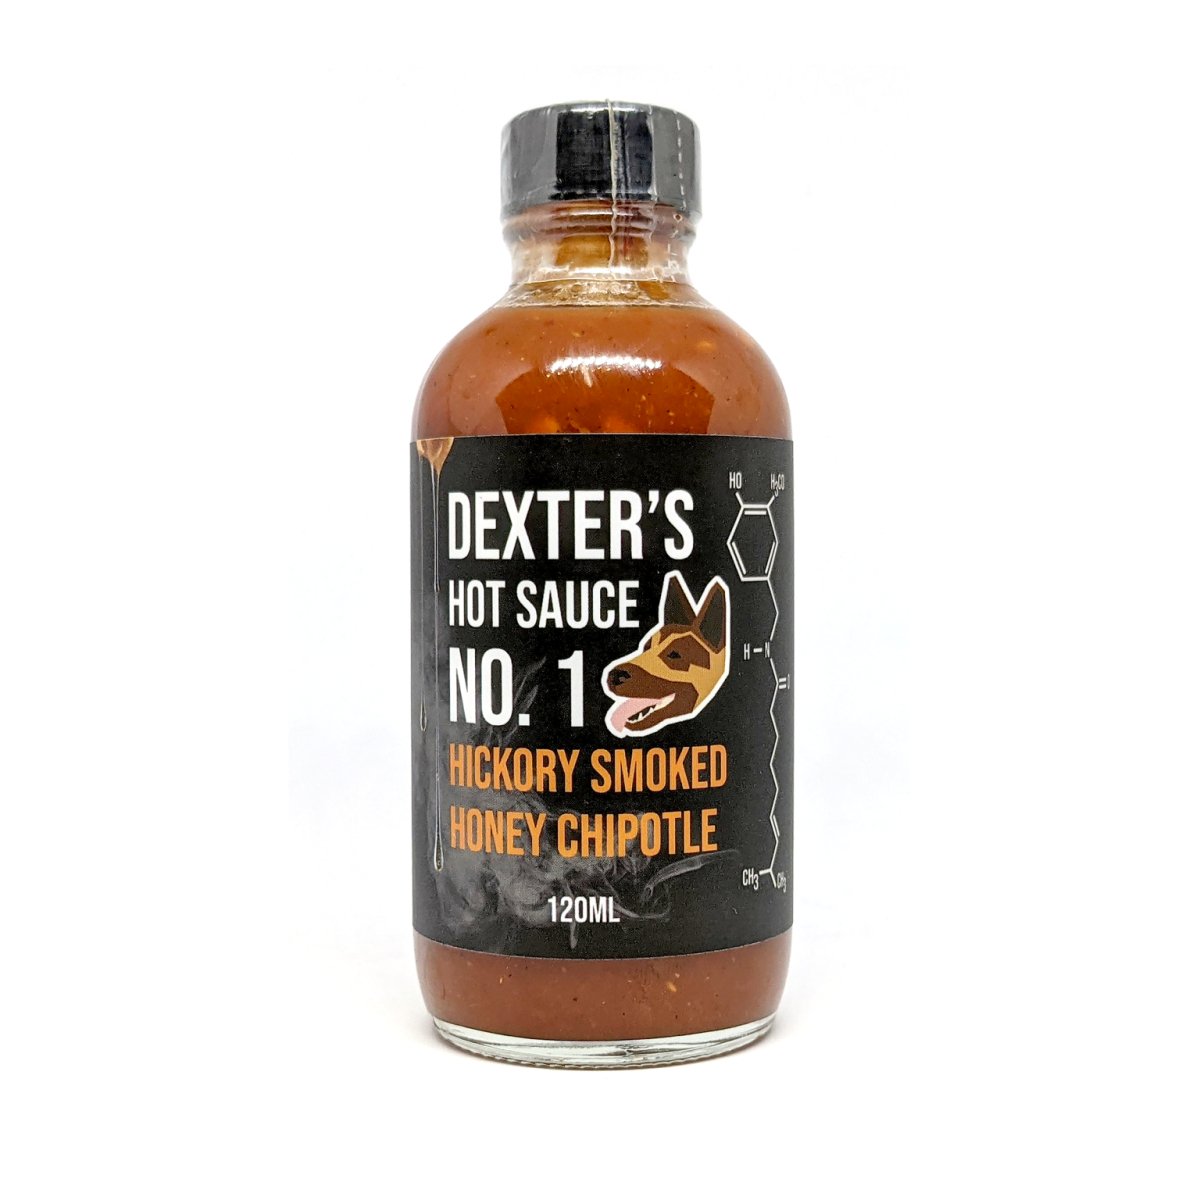 No.1 Hickory Smoked Honey Chipotle Hot Sauce (120ml) - Dexter's Spice Co. - Alpine Abode